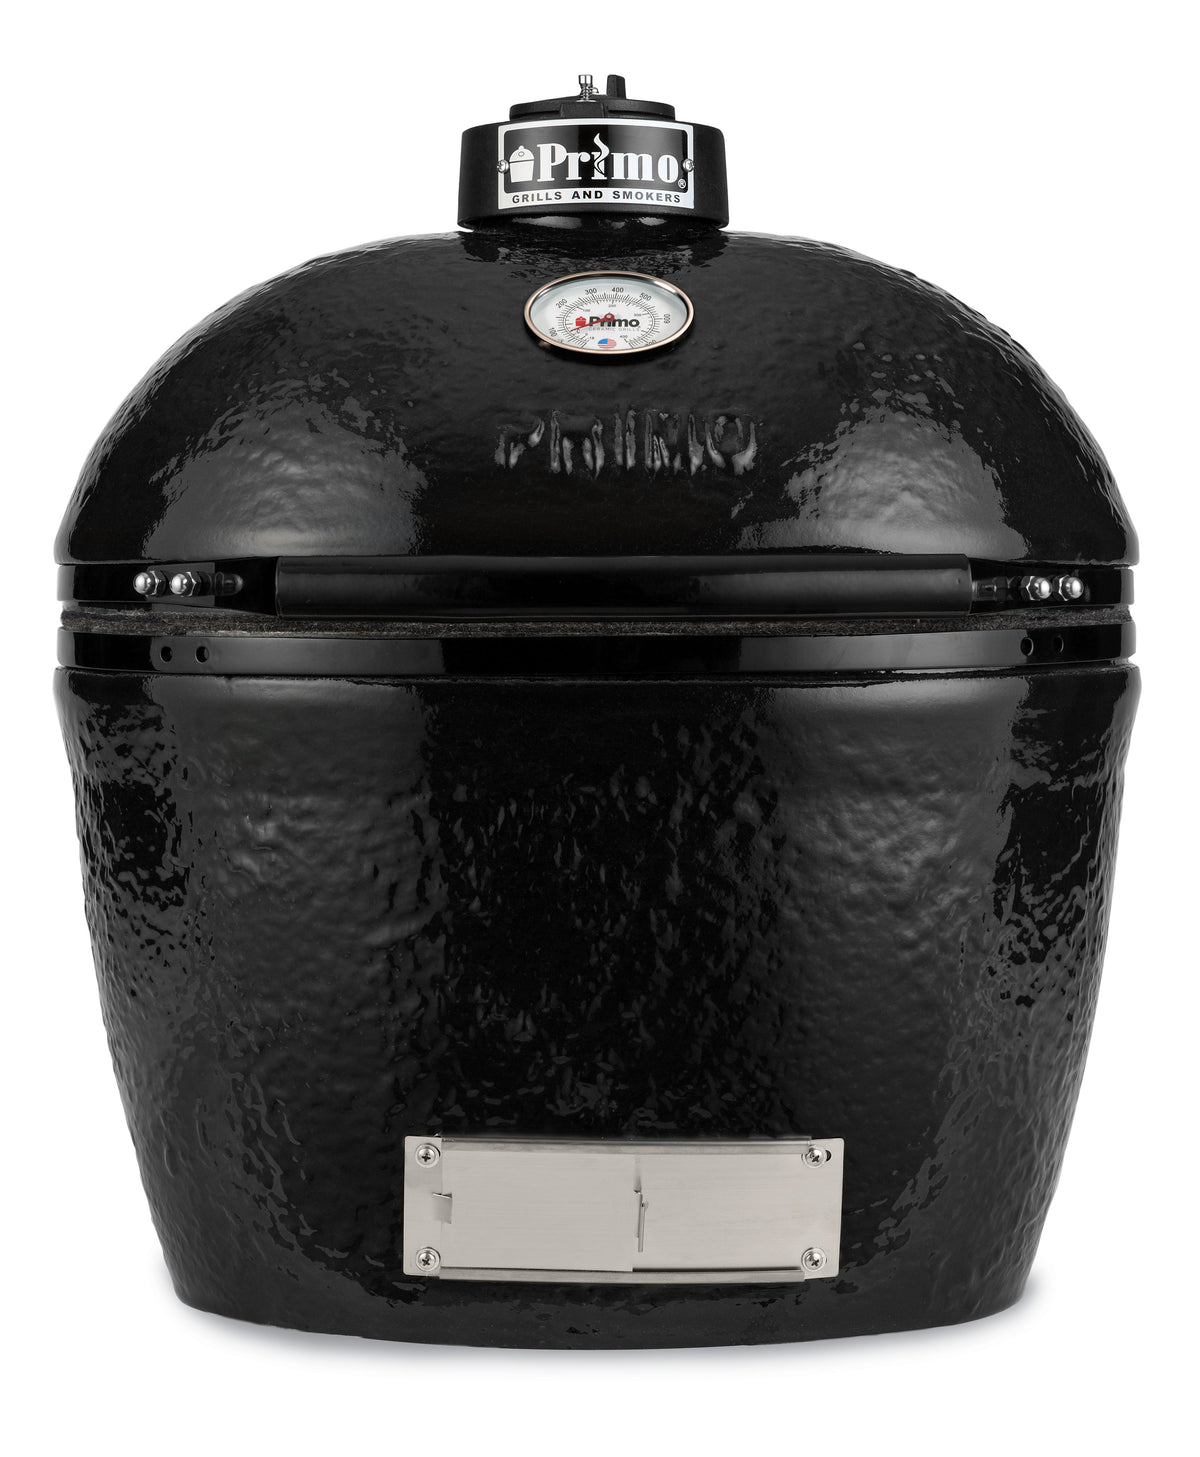 PRIMO KAMADO Oval LG 300 All-In-One